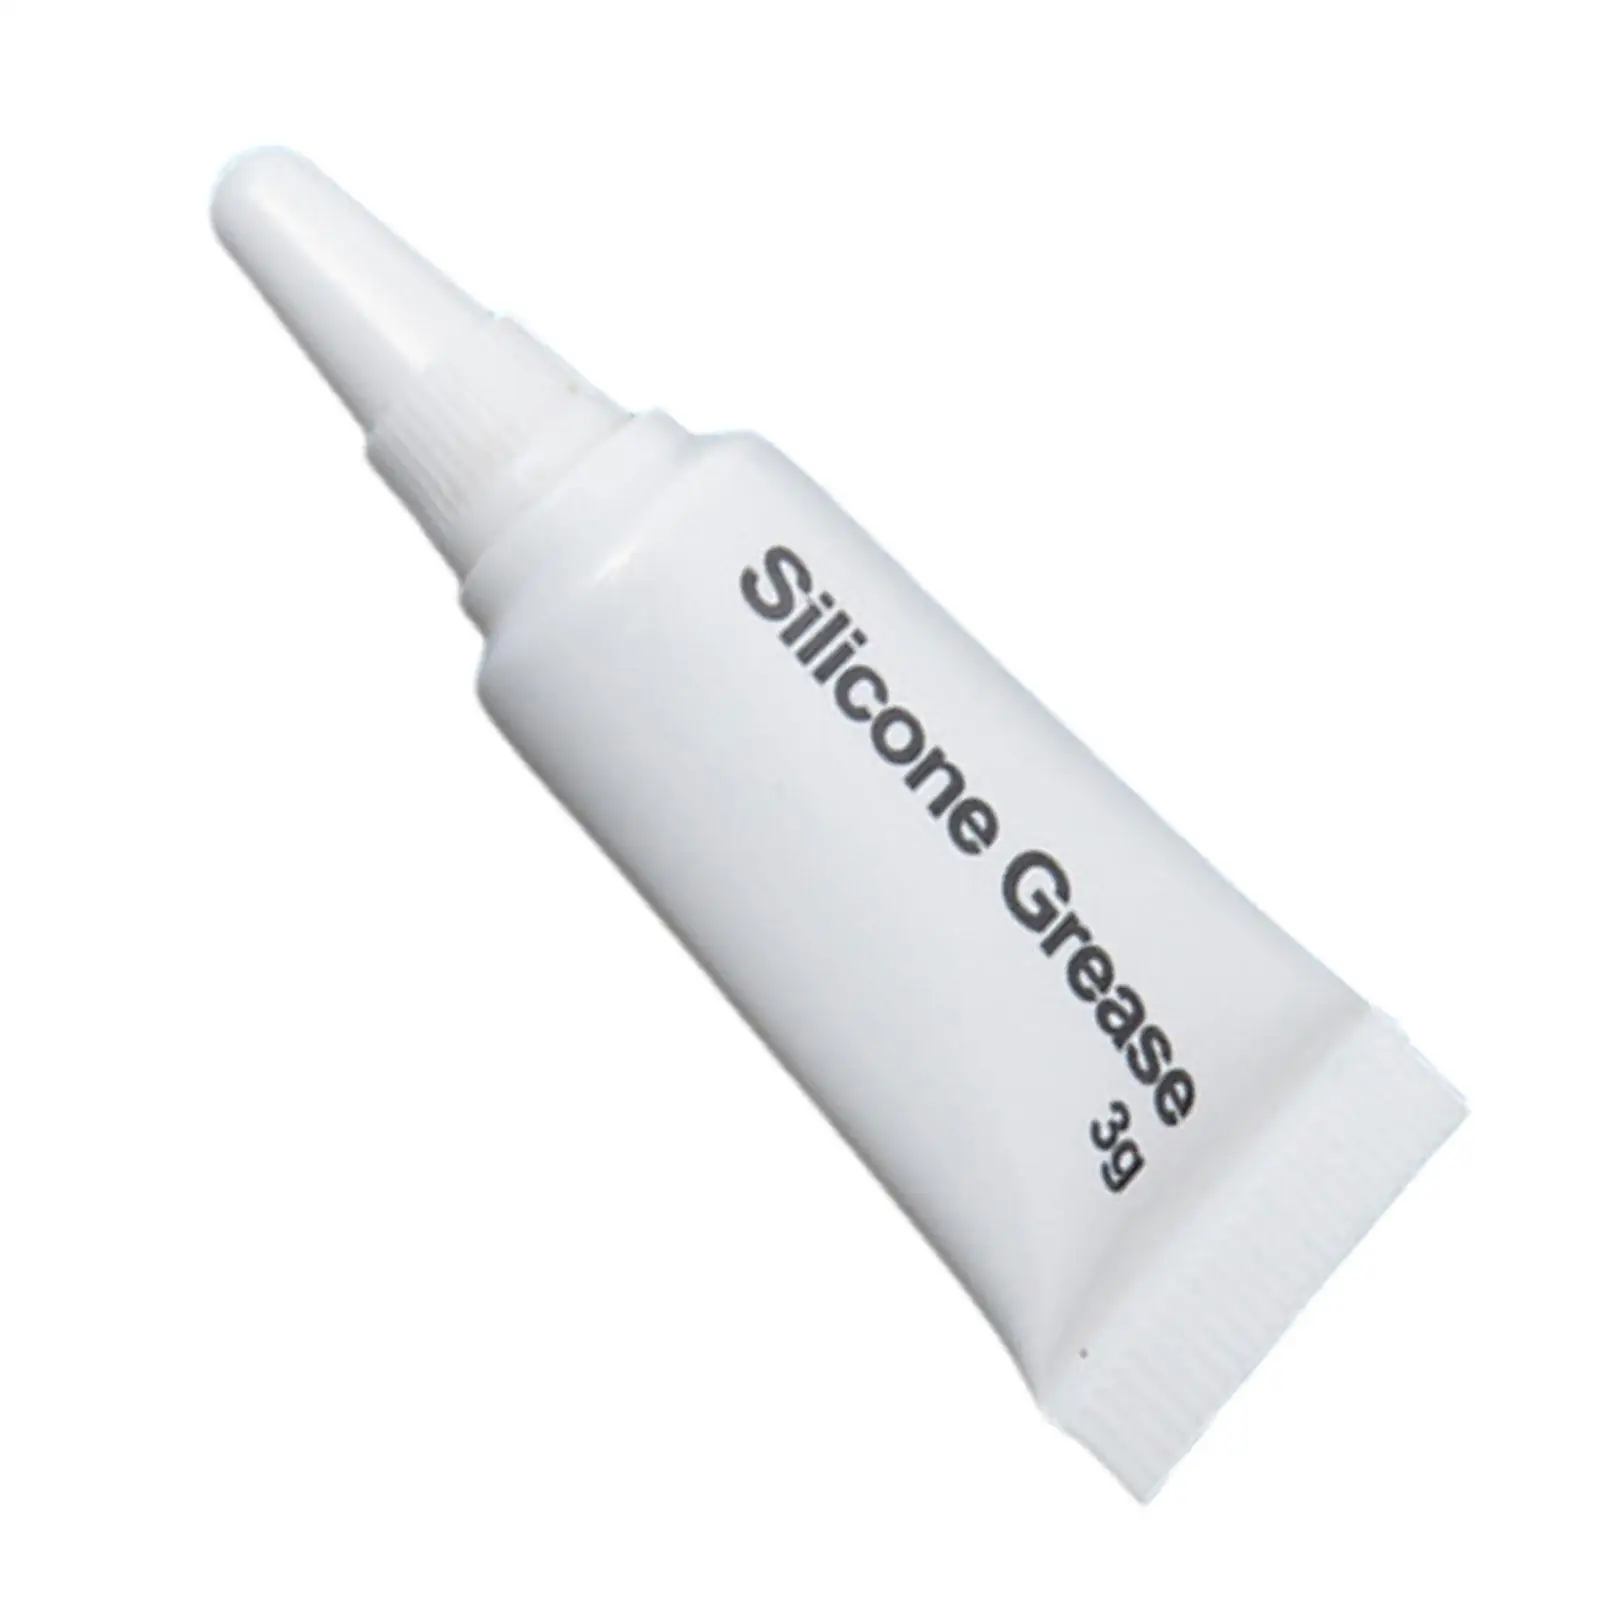 Maintenance Silicone Oil Silicone Mini Practical Liquid Lubricant Oil for Wetsuit Latex Tubes Maintenance Tool